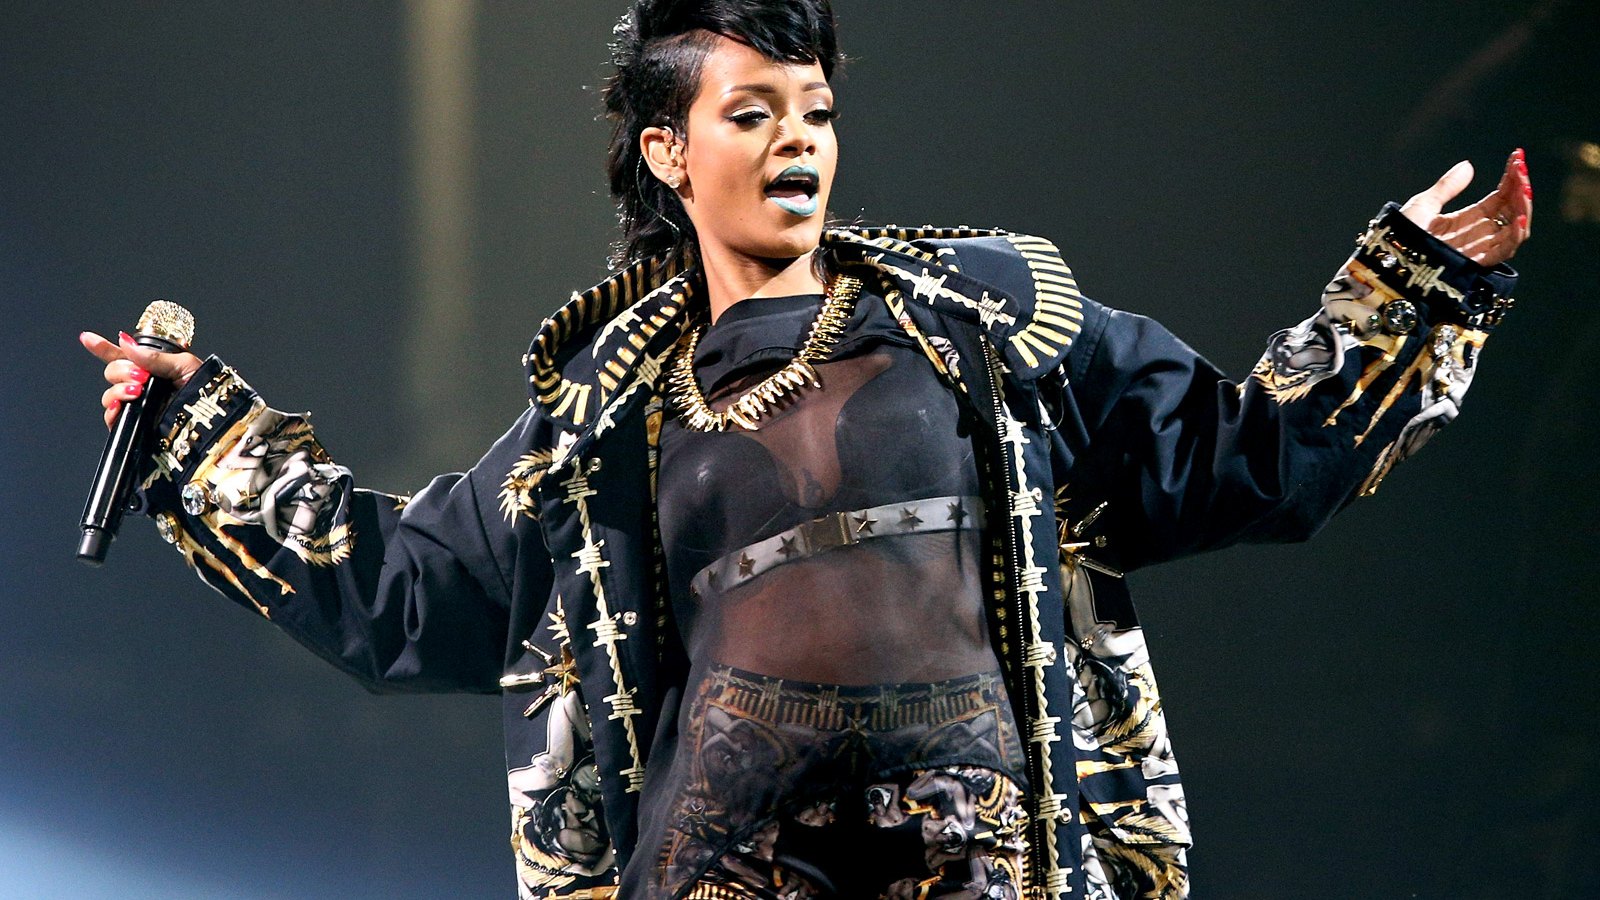 Rihanna performs live on stage at Allphones Arena on October 3, 2013